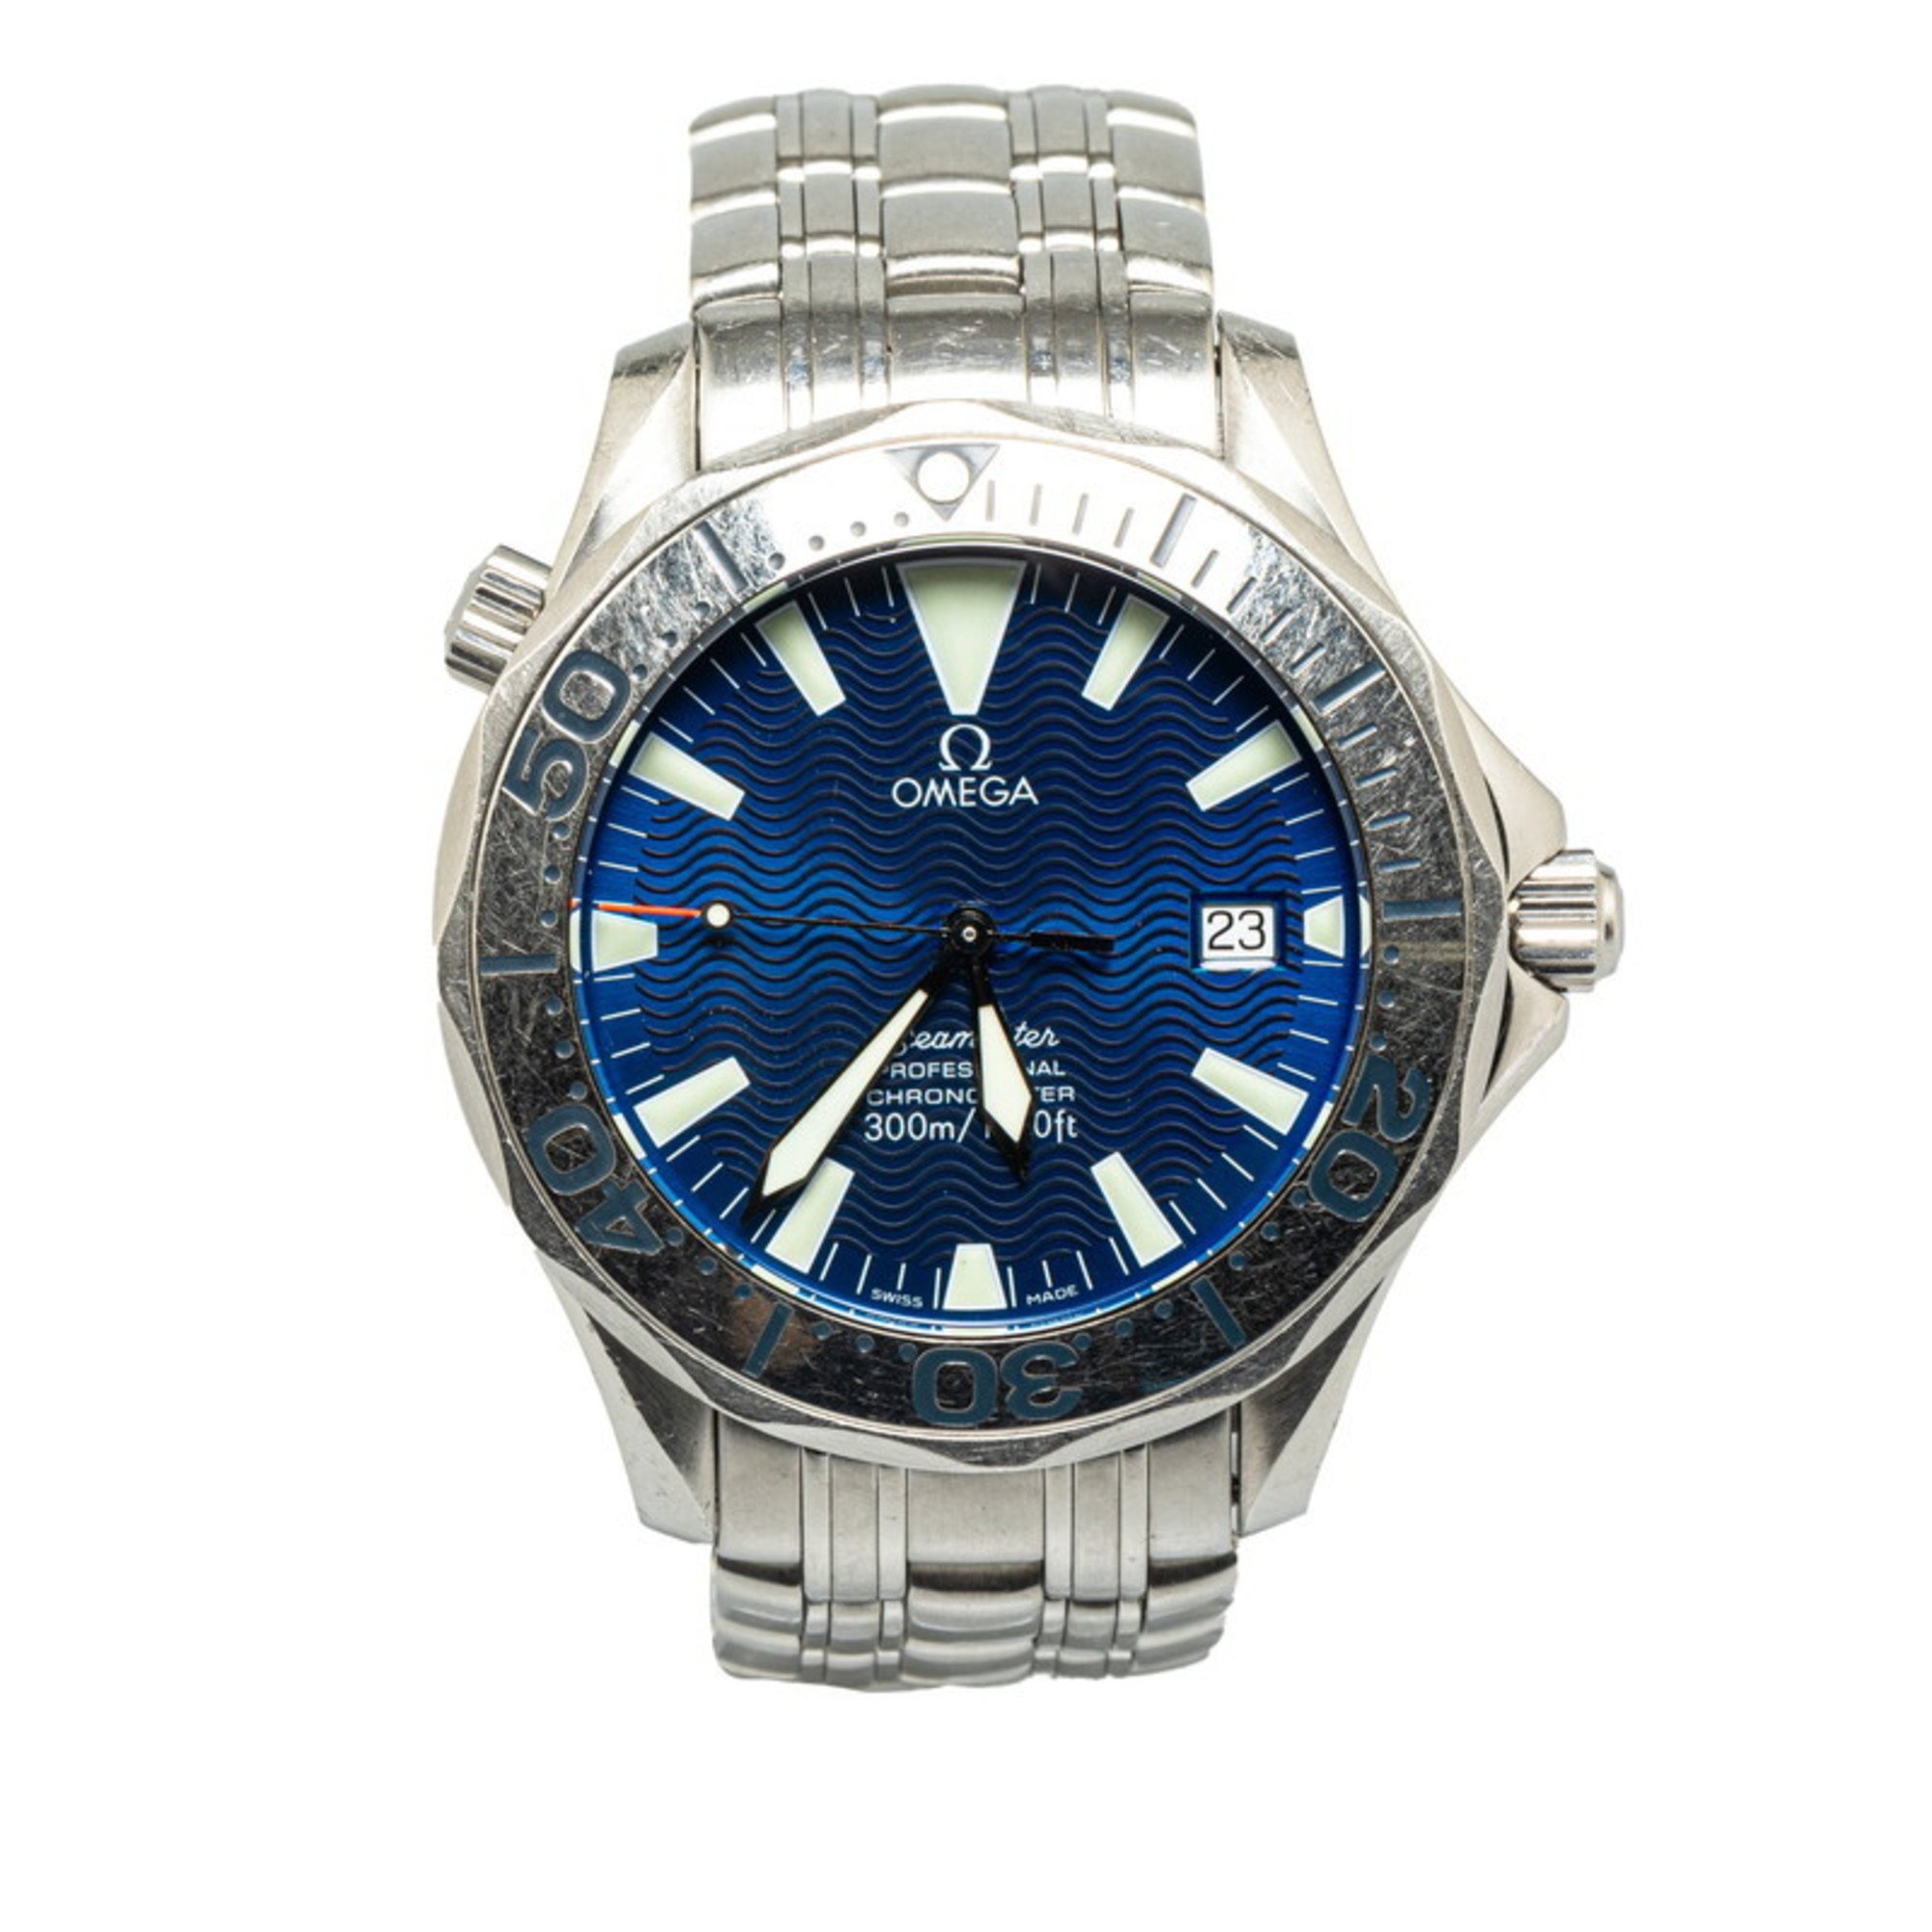 OMEGA Seamaster Professional Watch 2255.80 Automatic Blue Dial Stainless Steel Men's